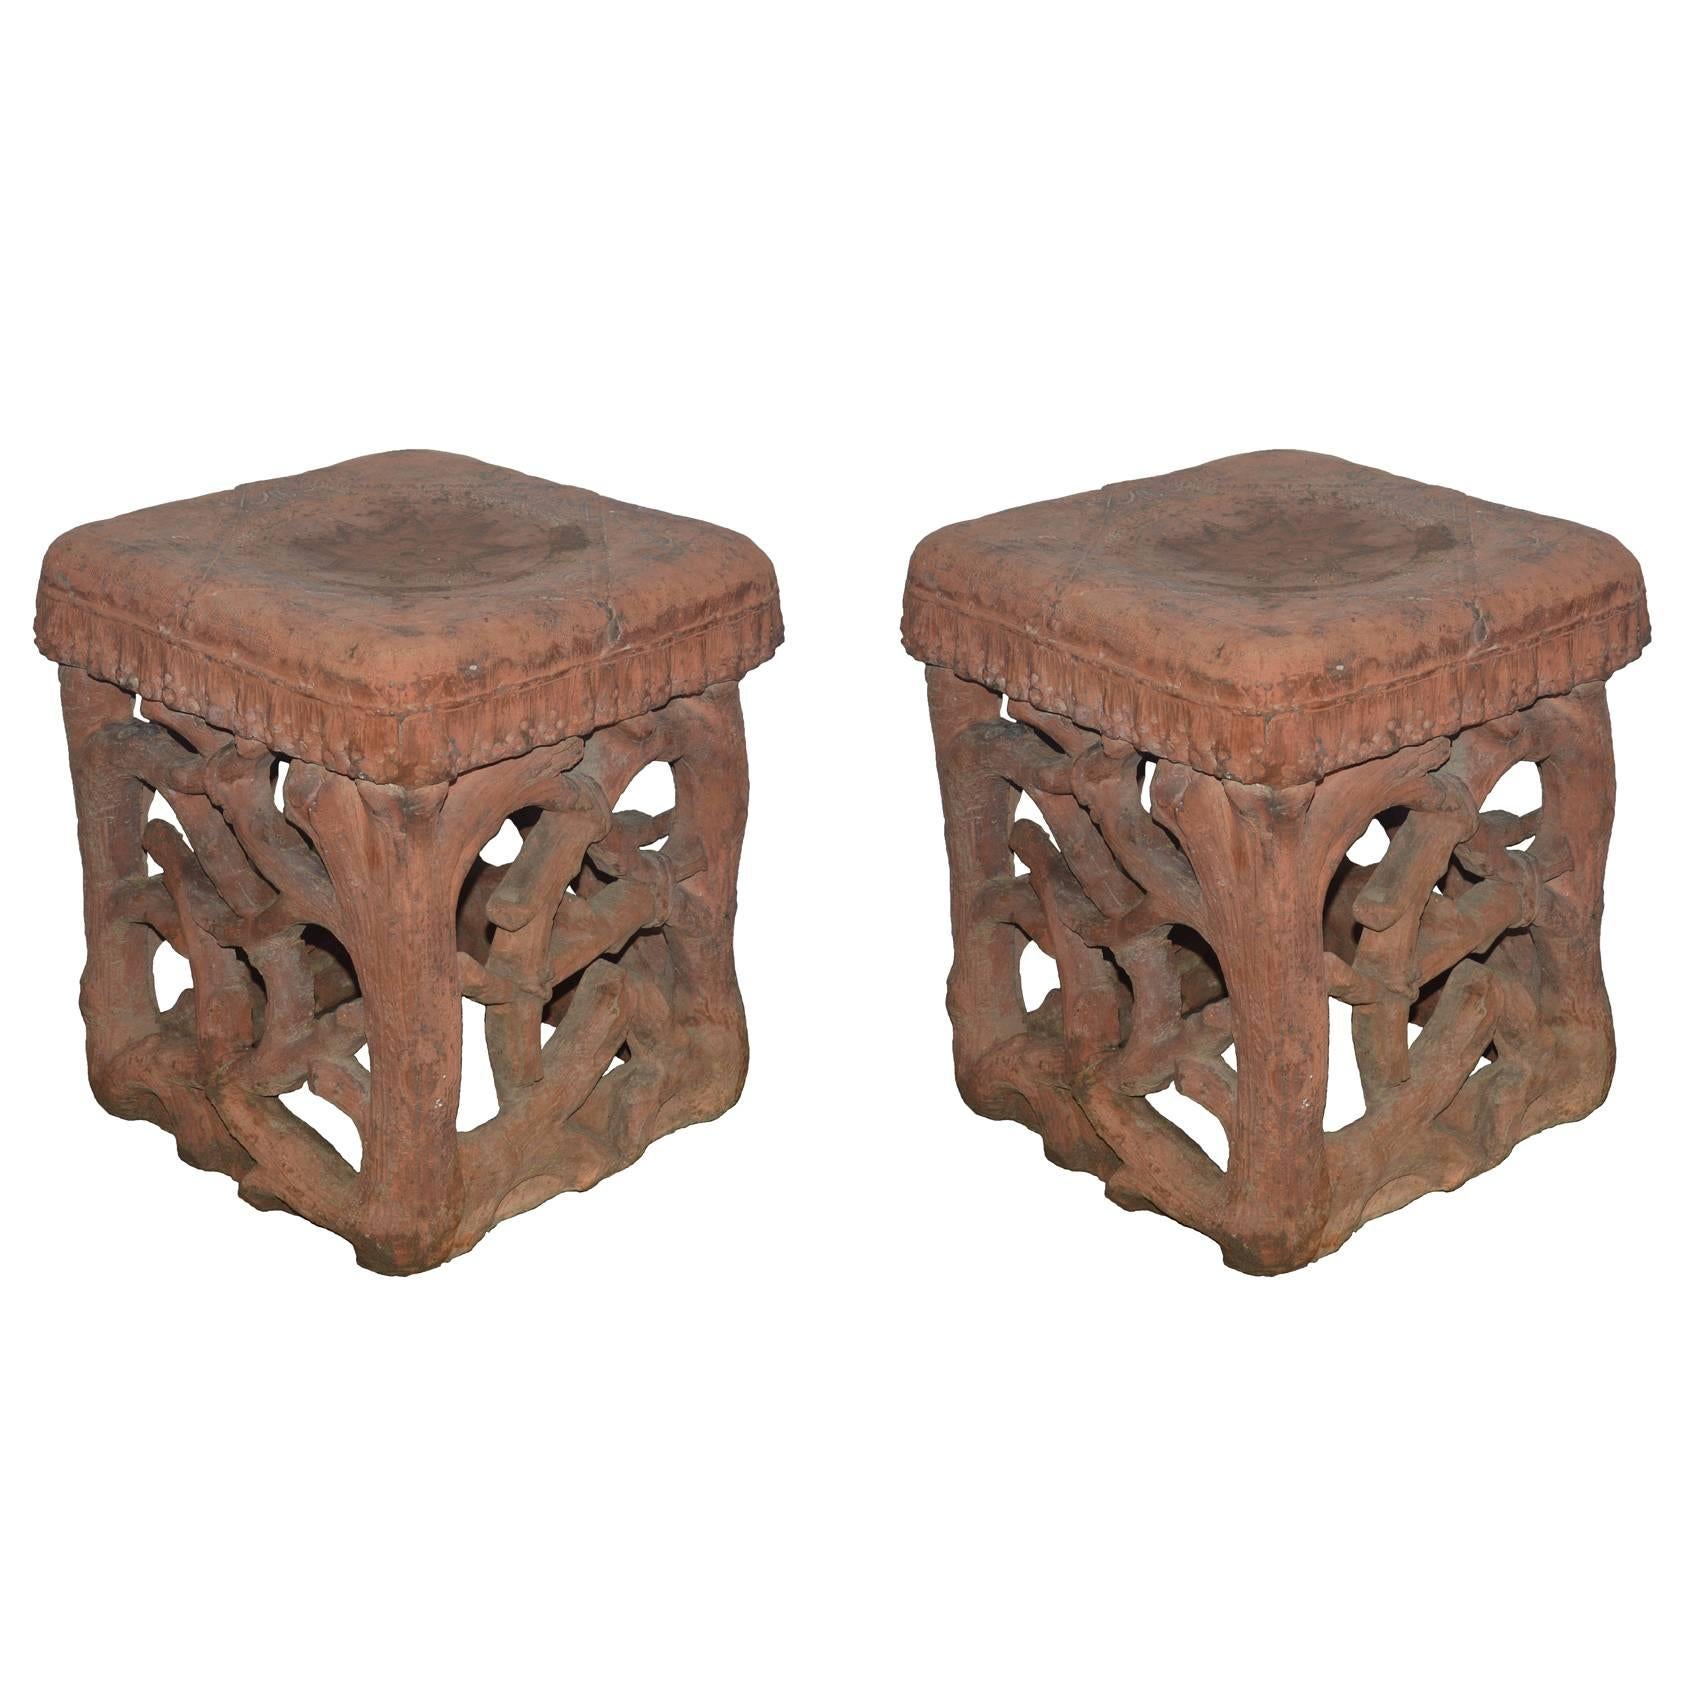 Pair of French Square Terra Cotta Stool Side Tables